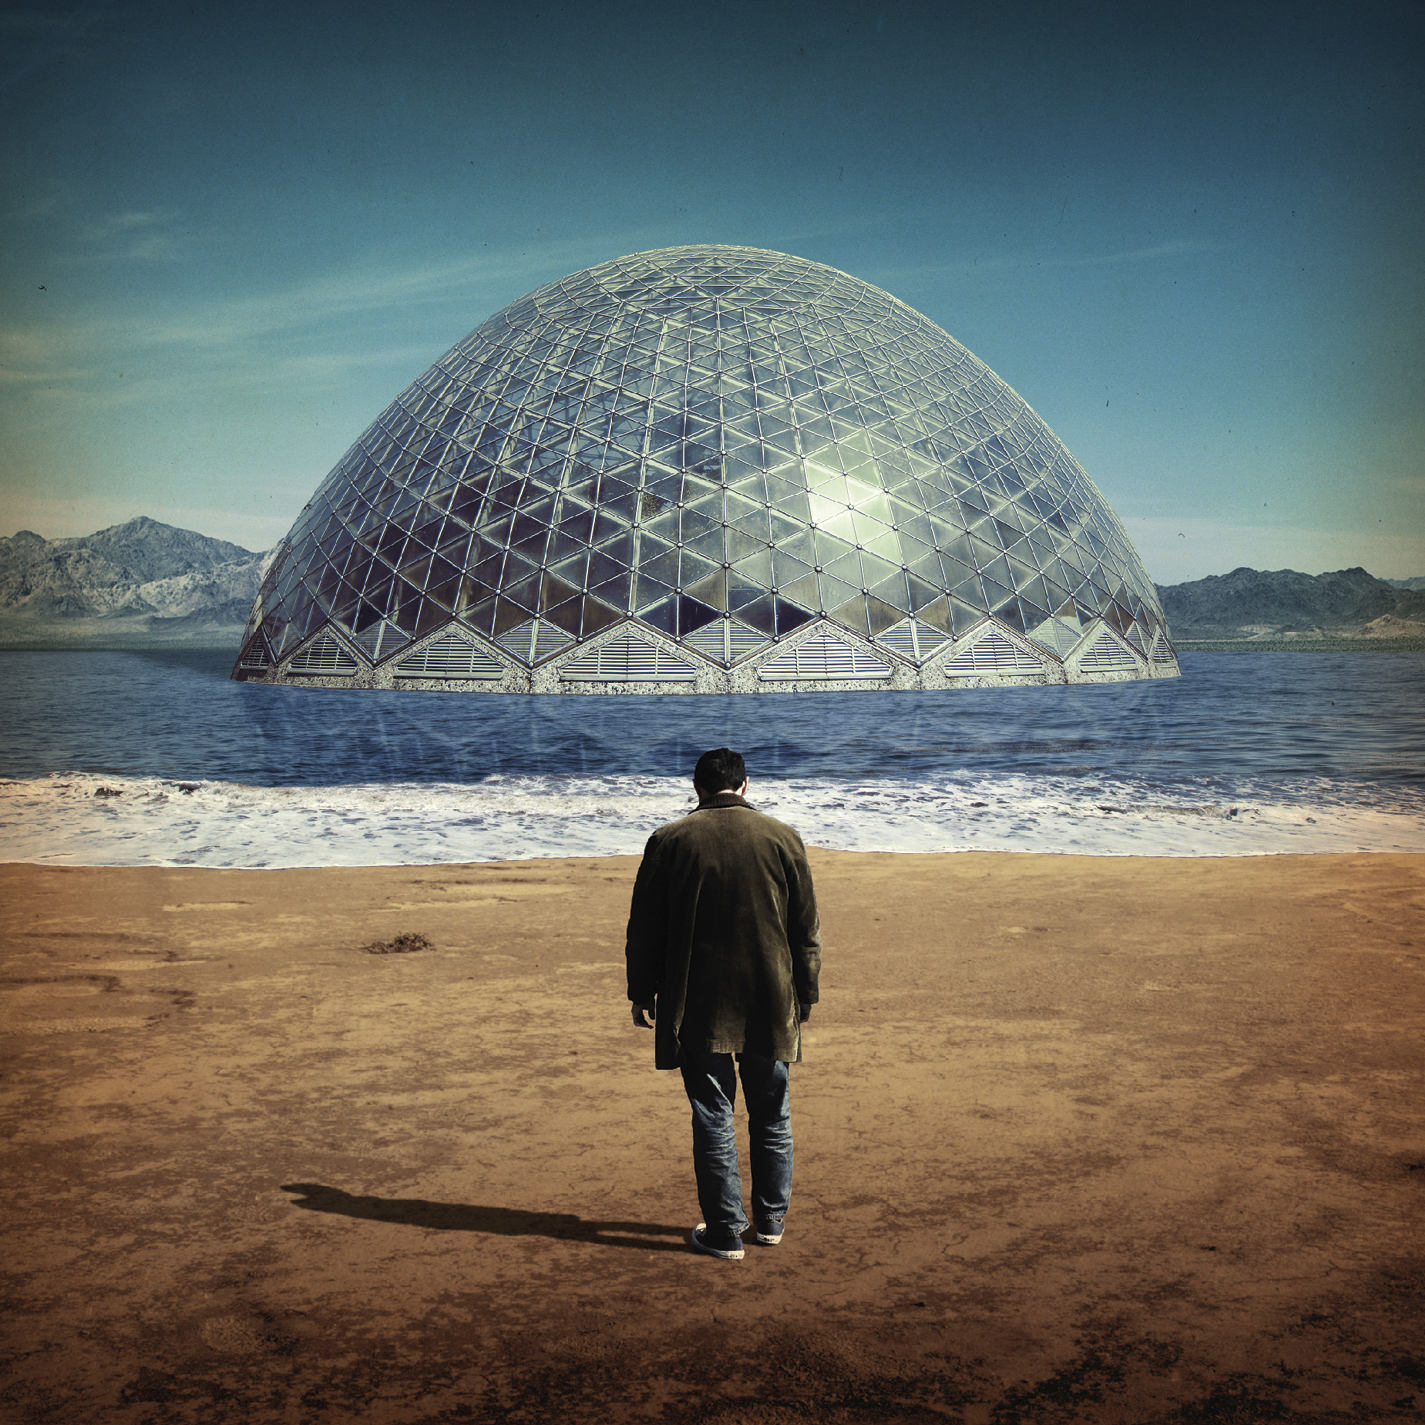 Damien Jurado has just announced that his next album, titled Brothers and